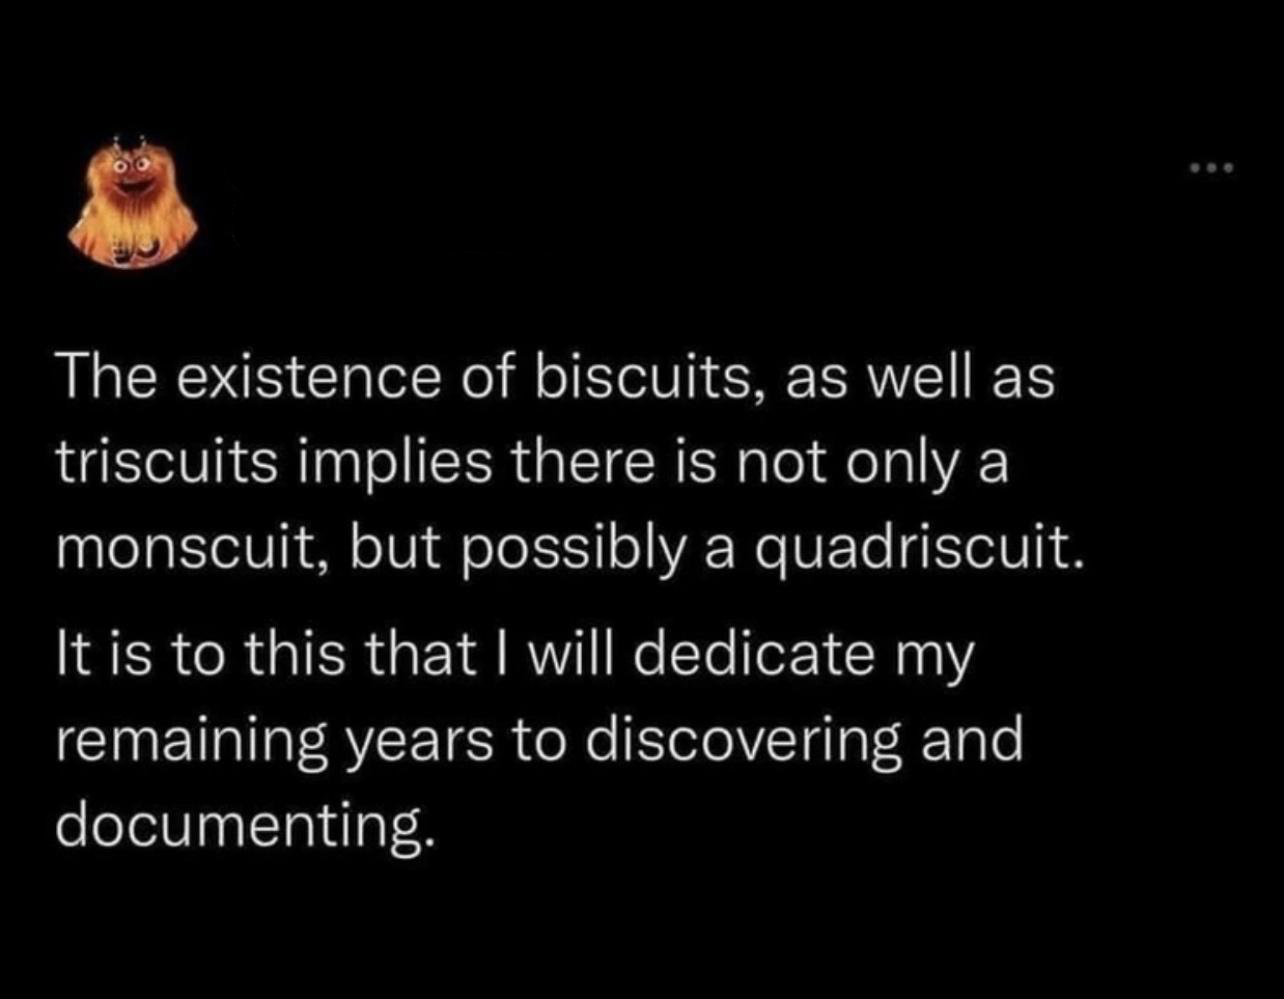 funny tweets - existence of biscuits as well as triscuits - The existence of biscuits, as well as triscuits implies there is not only a monscuit, but possibly a quadriscuit. It is to this that I will dedicate my remaining years to discovering and document